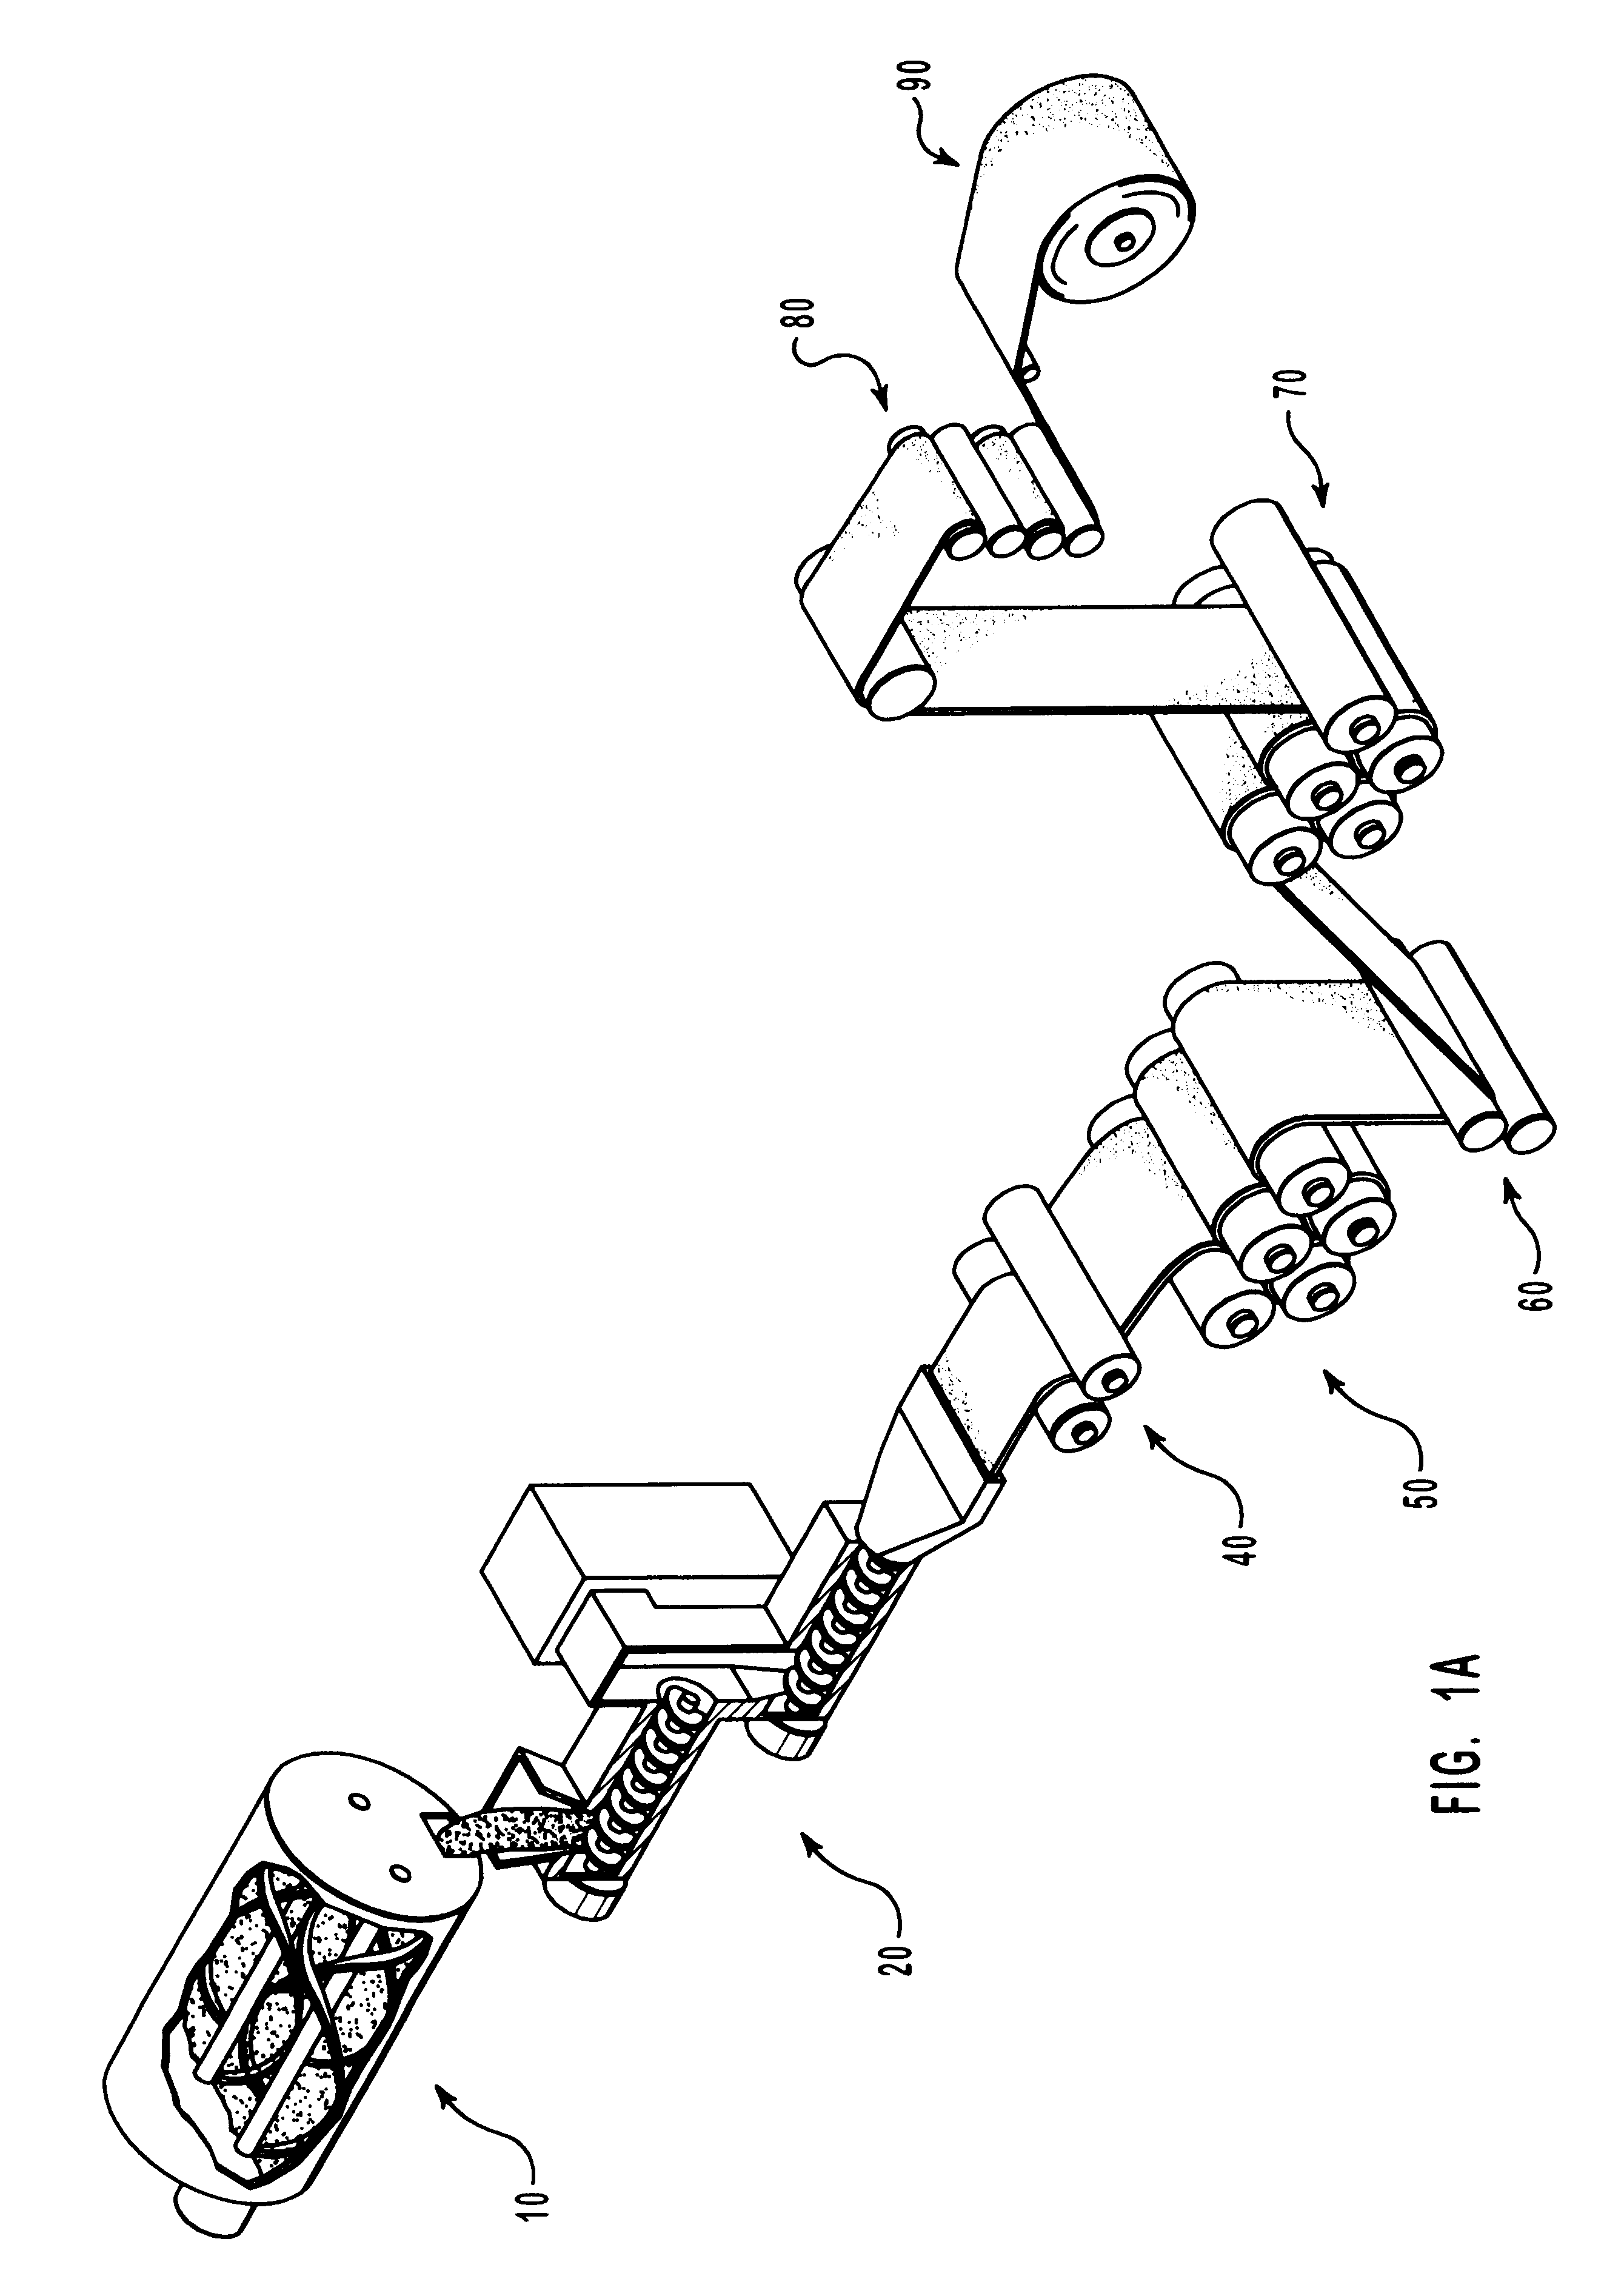 Methods for the manufacture of sheets having a highly inorganically filled organic polymer matrix